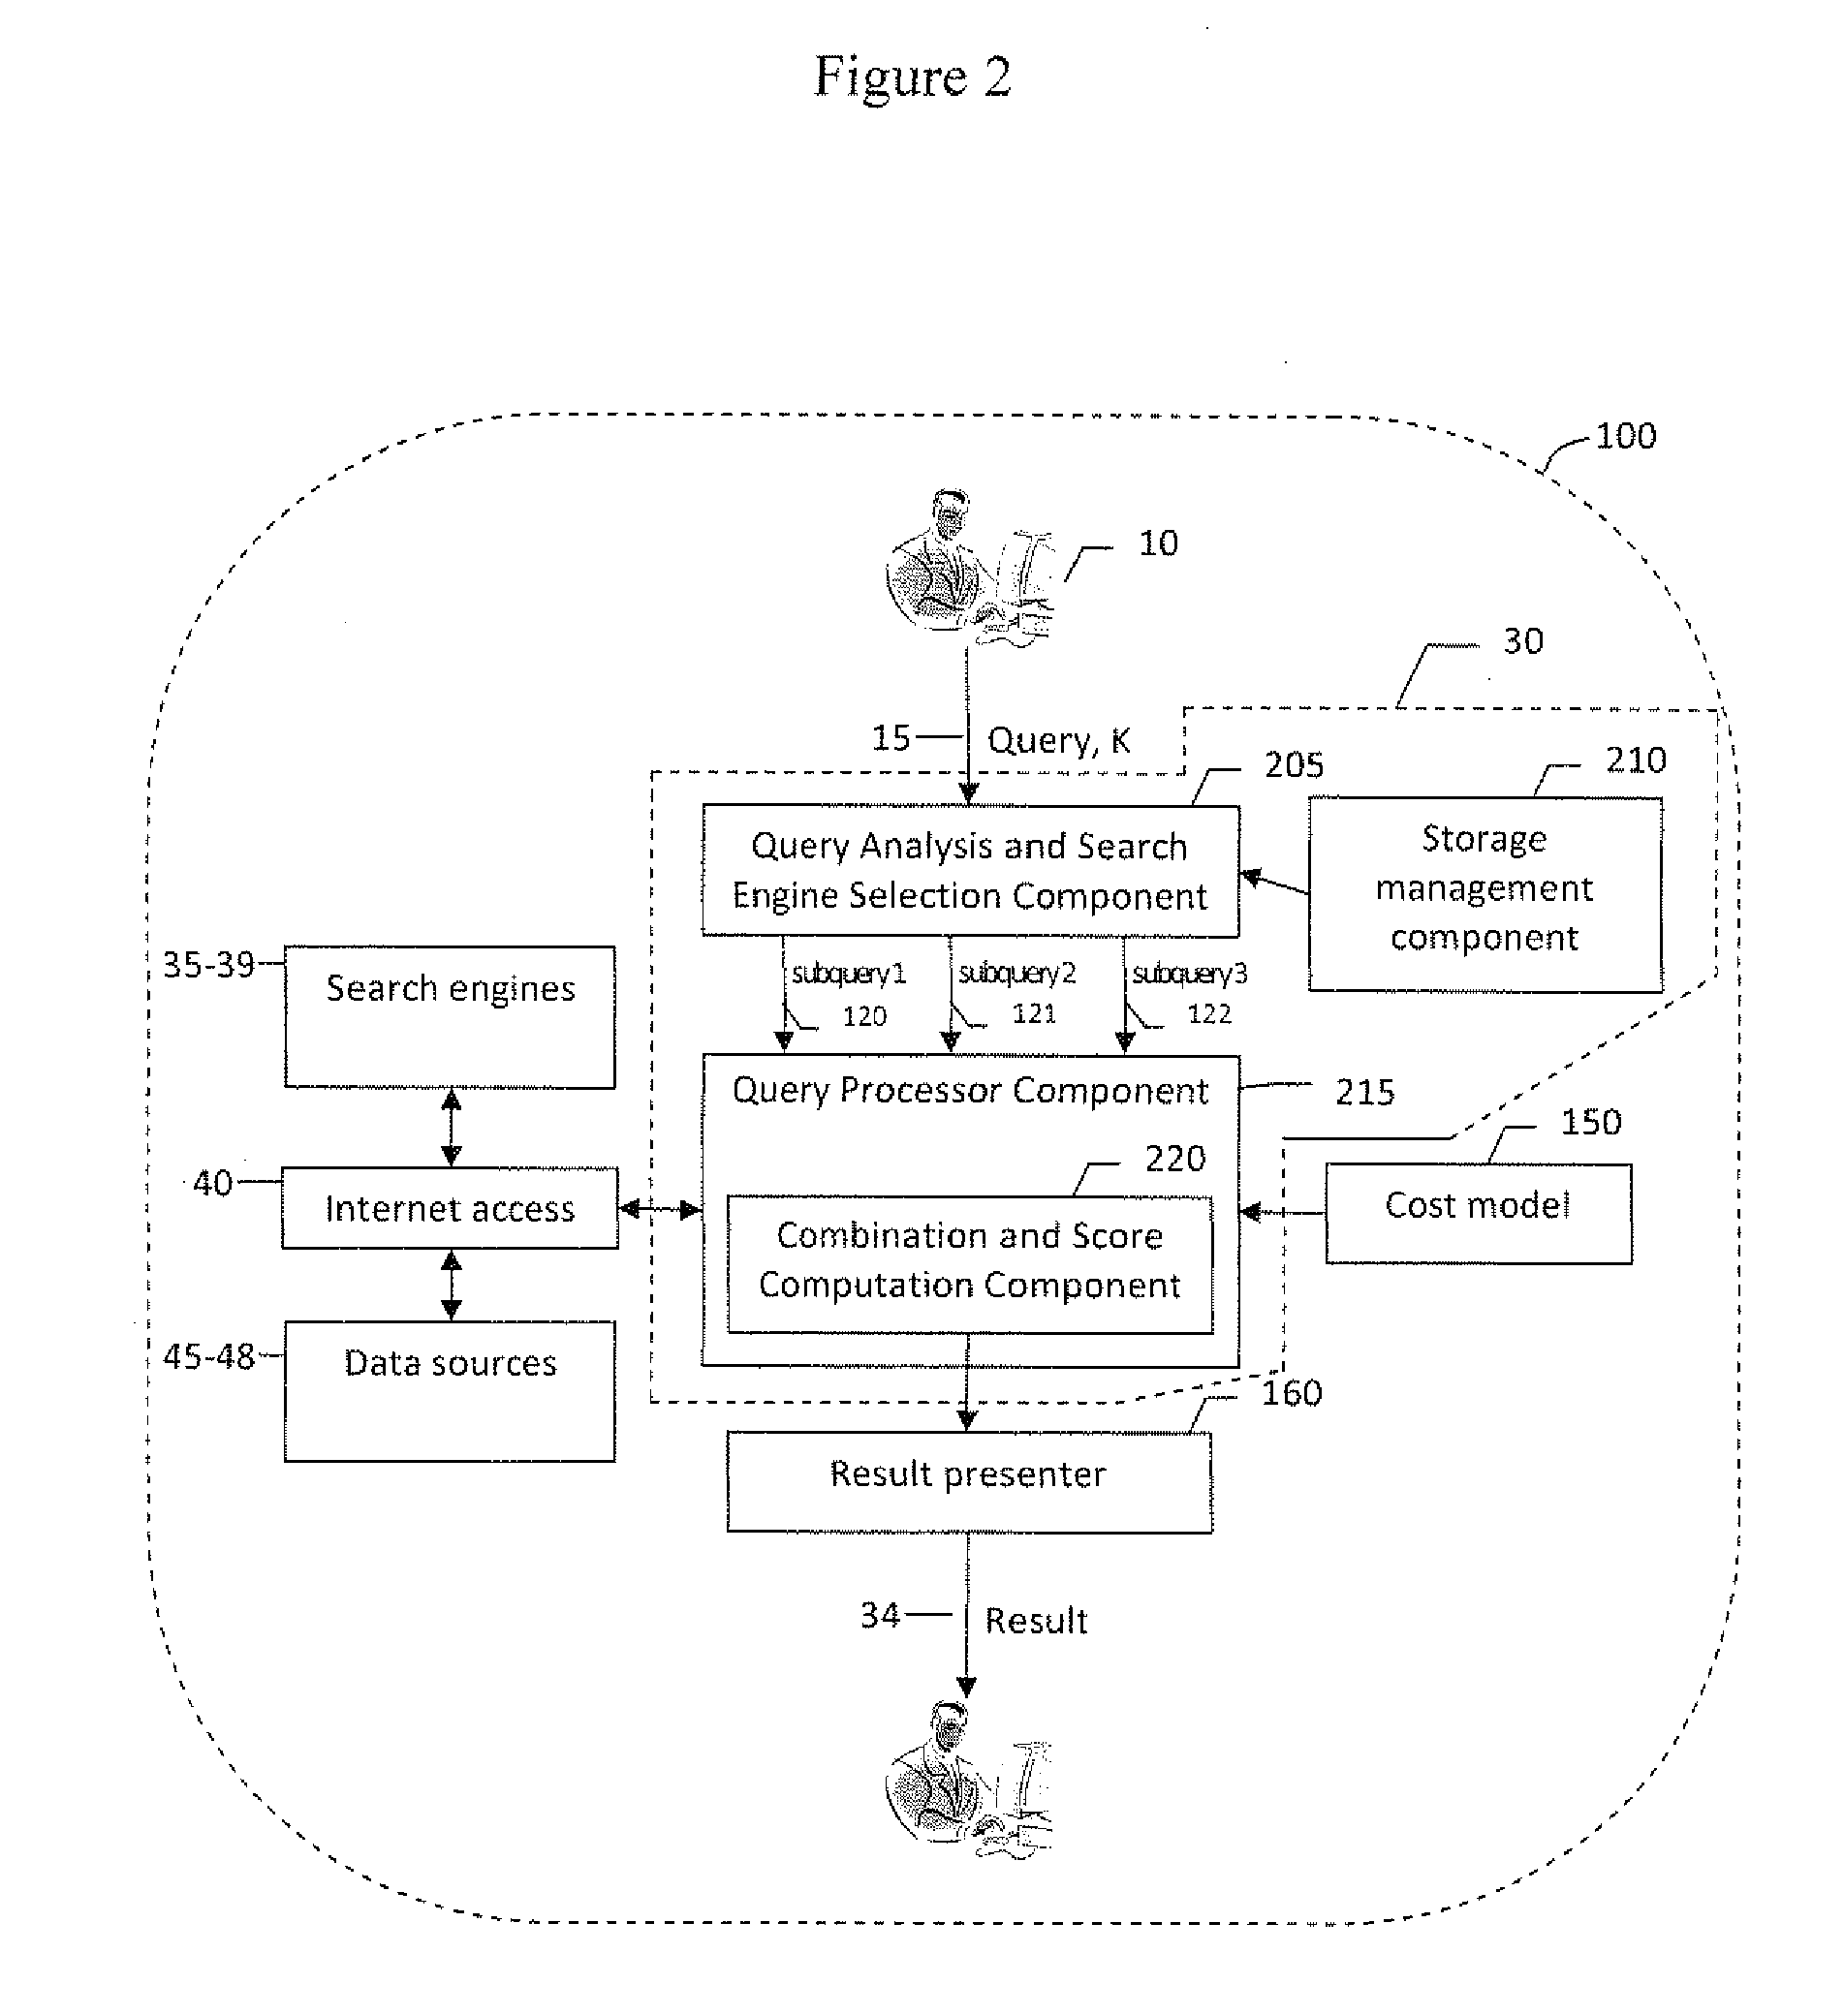 Method for extracting, merging and ranking search engine results